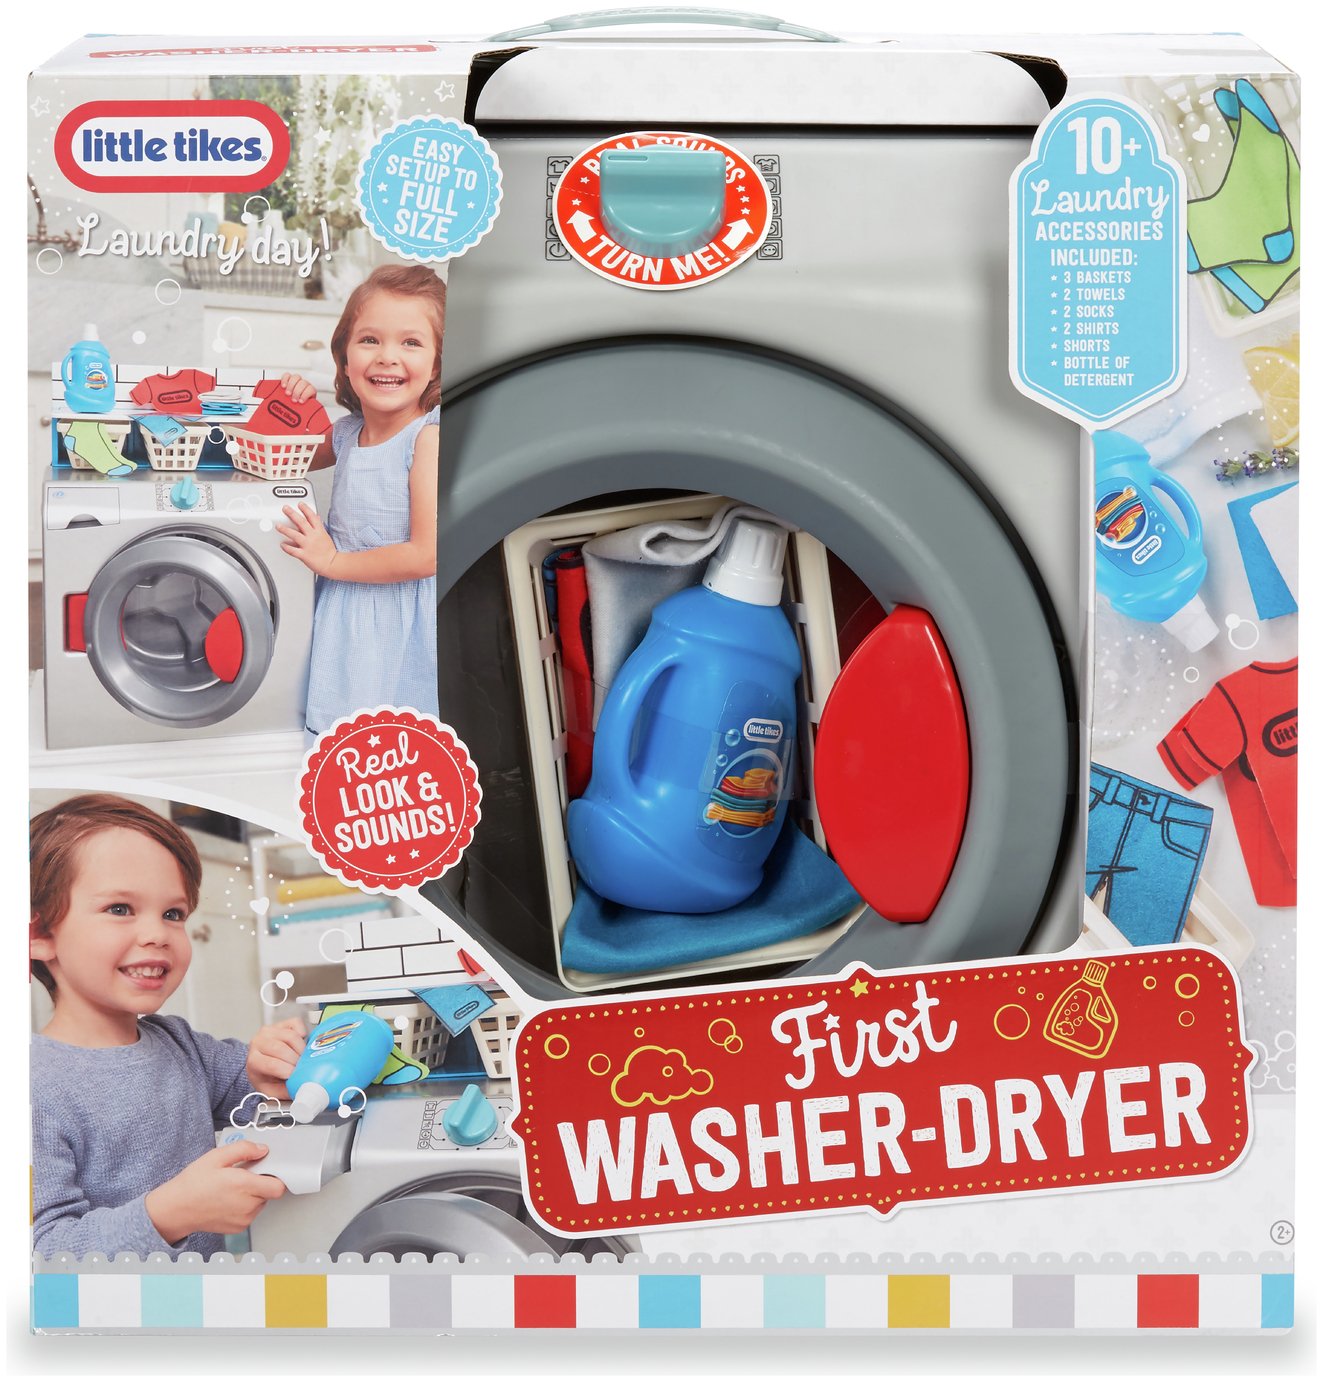 Little Tikes First Washer-Dryer review